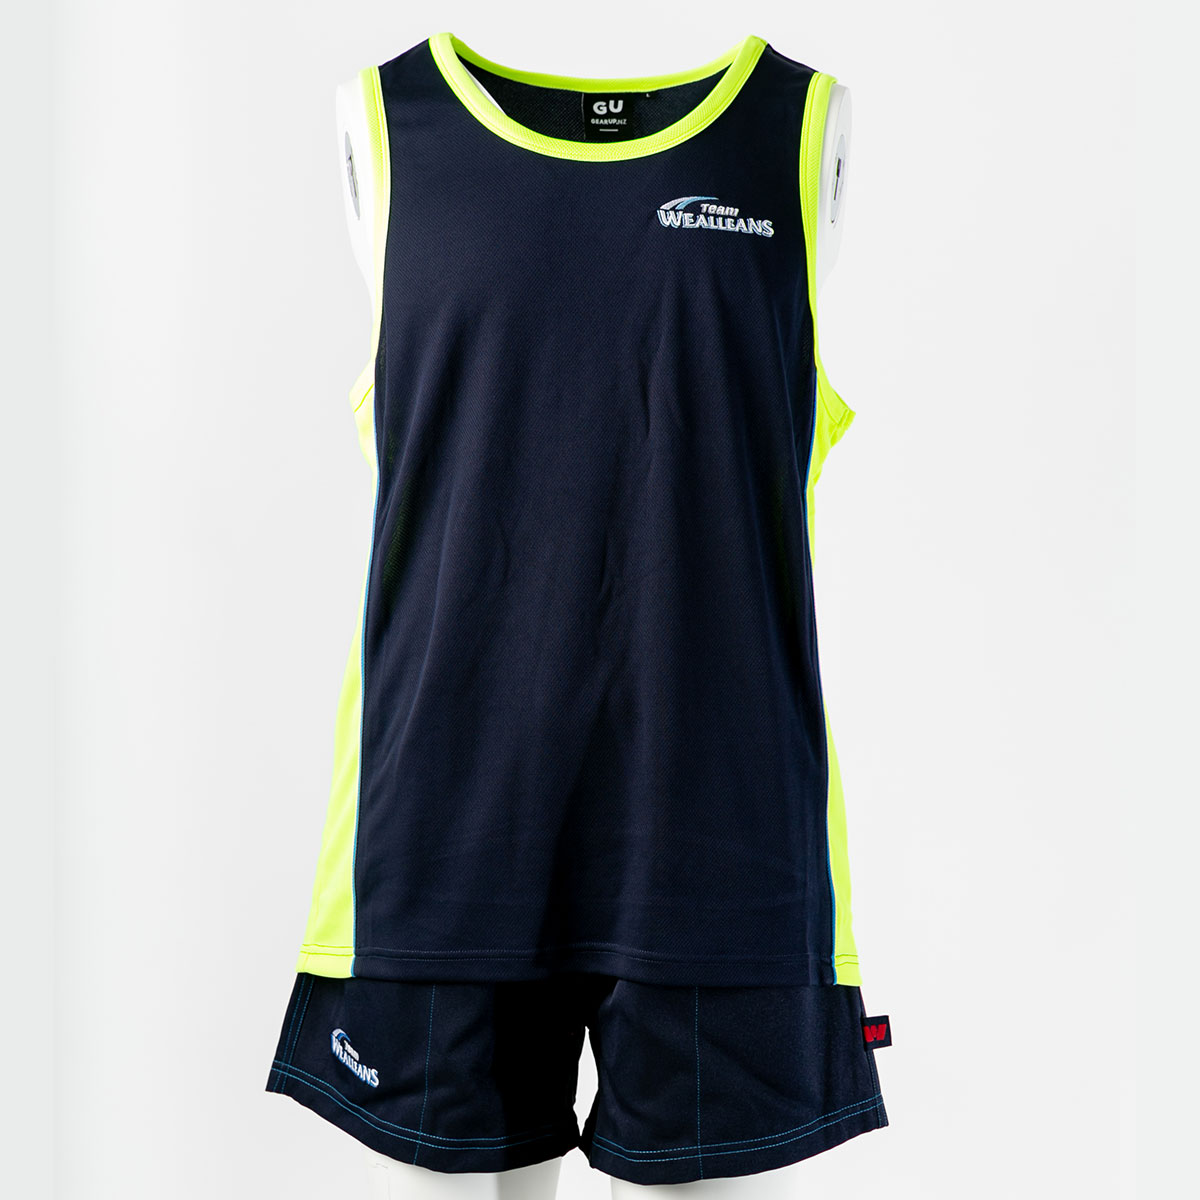 Birdseye Polyester Singlet with Rugby Shorts featuring embrodiered logos and Red W side seam tag